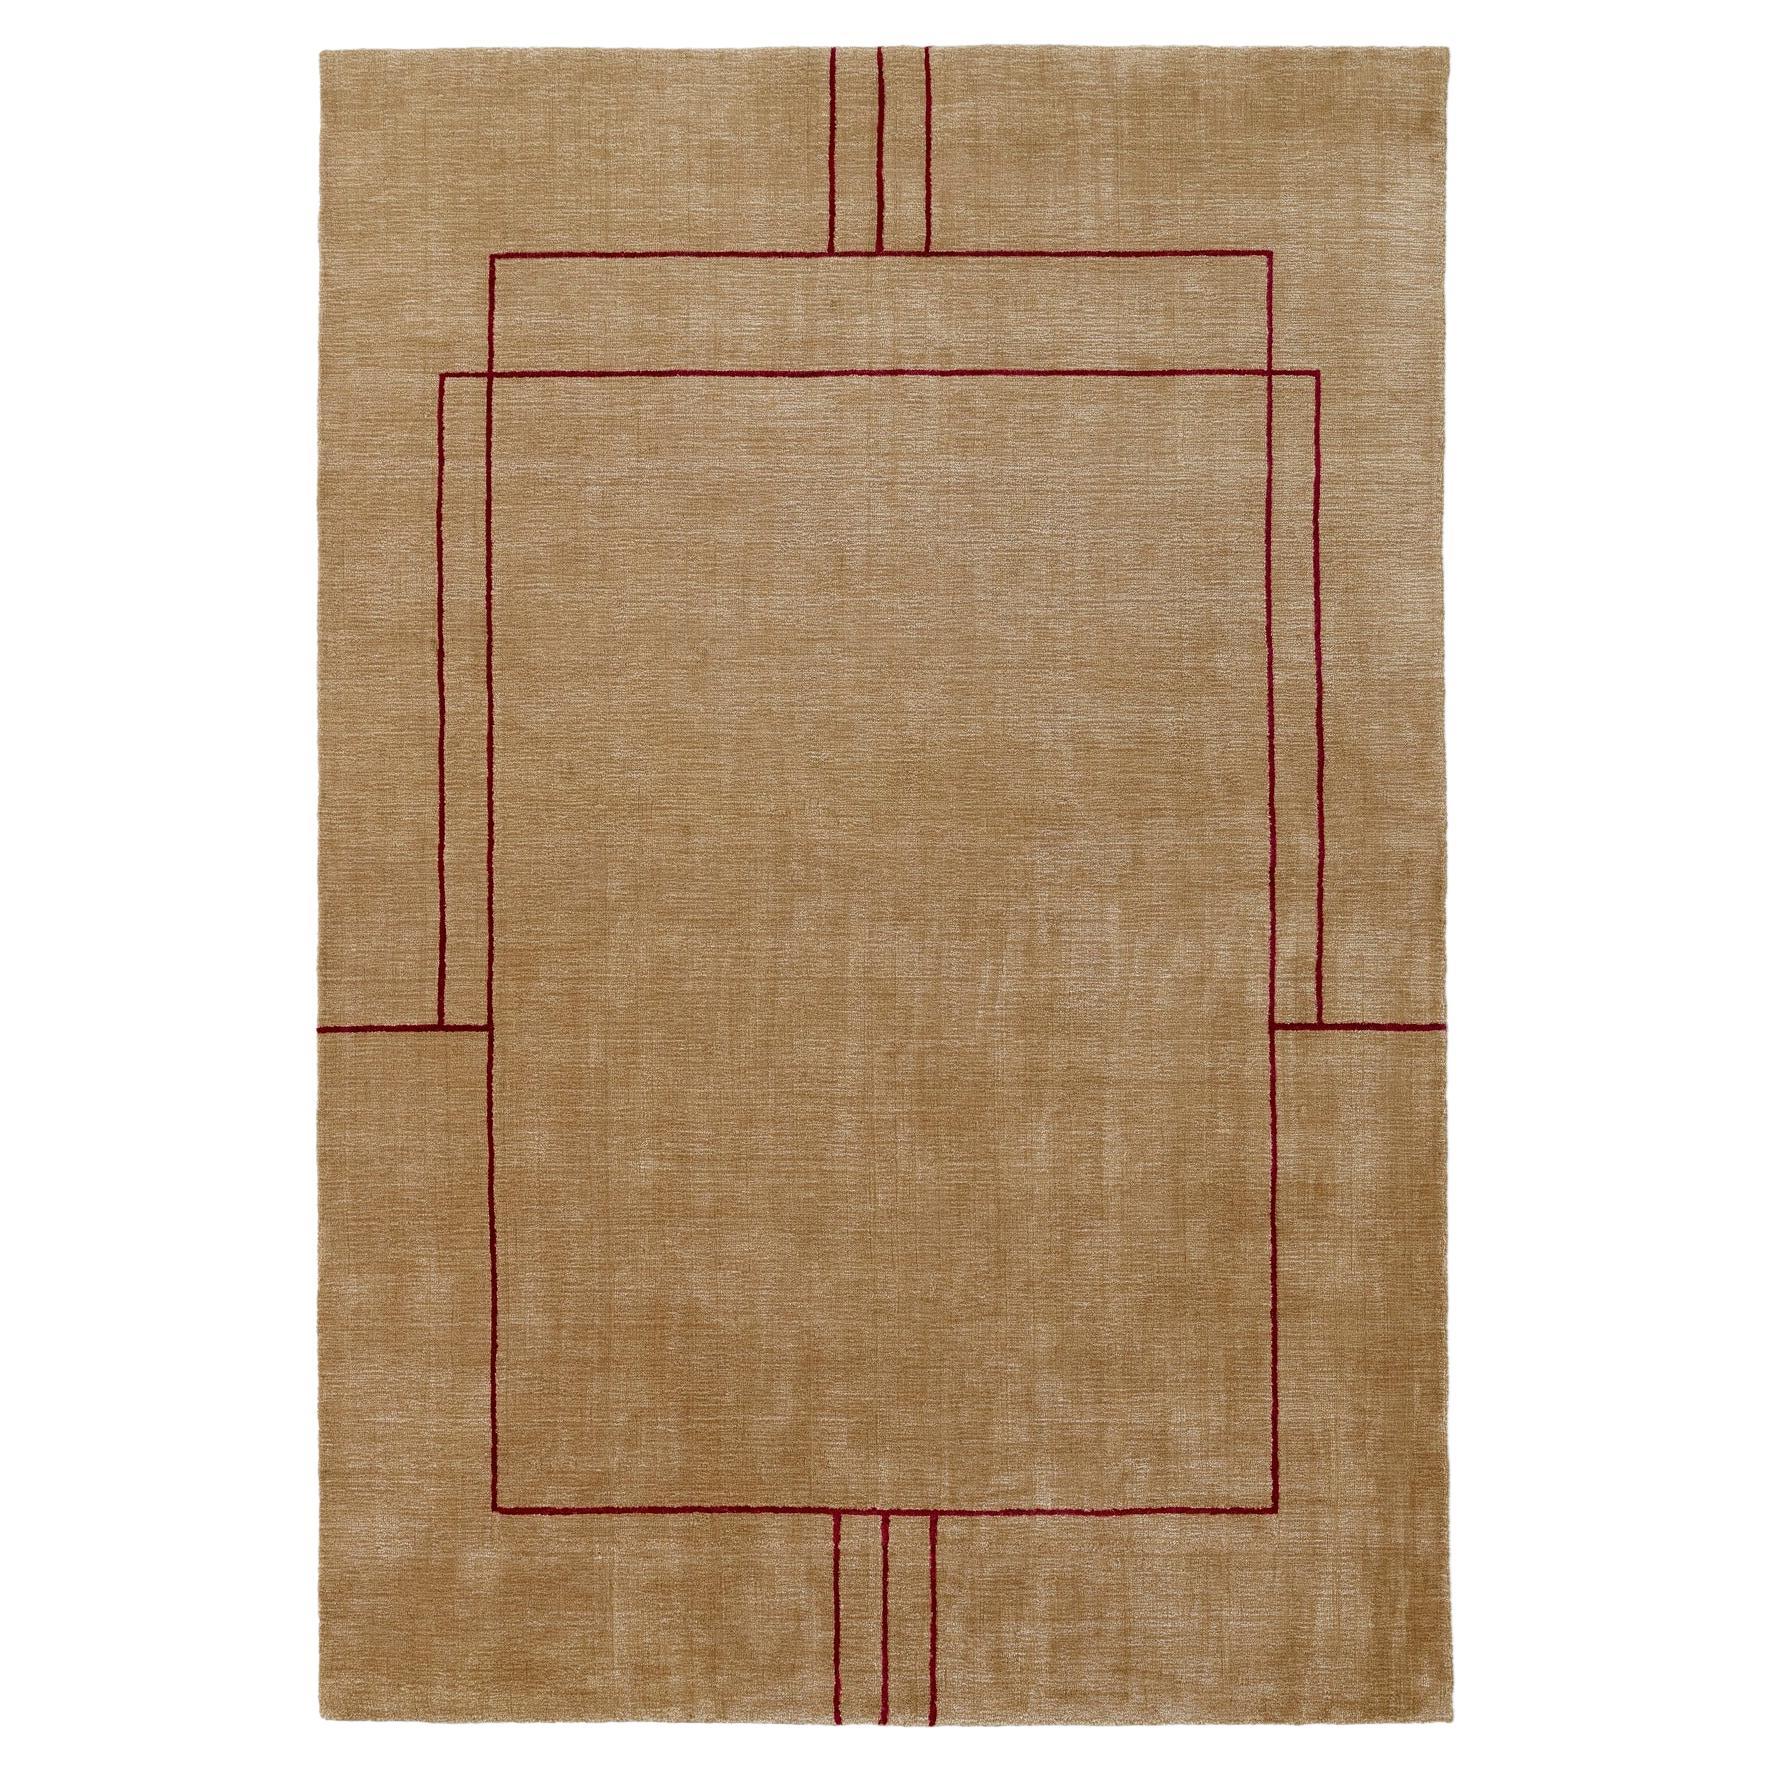 Cruise AP12 Rug, Bombay Golden Brown, Designed by All the Way to Paris for &T 